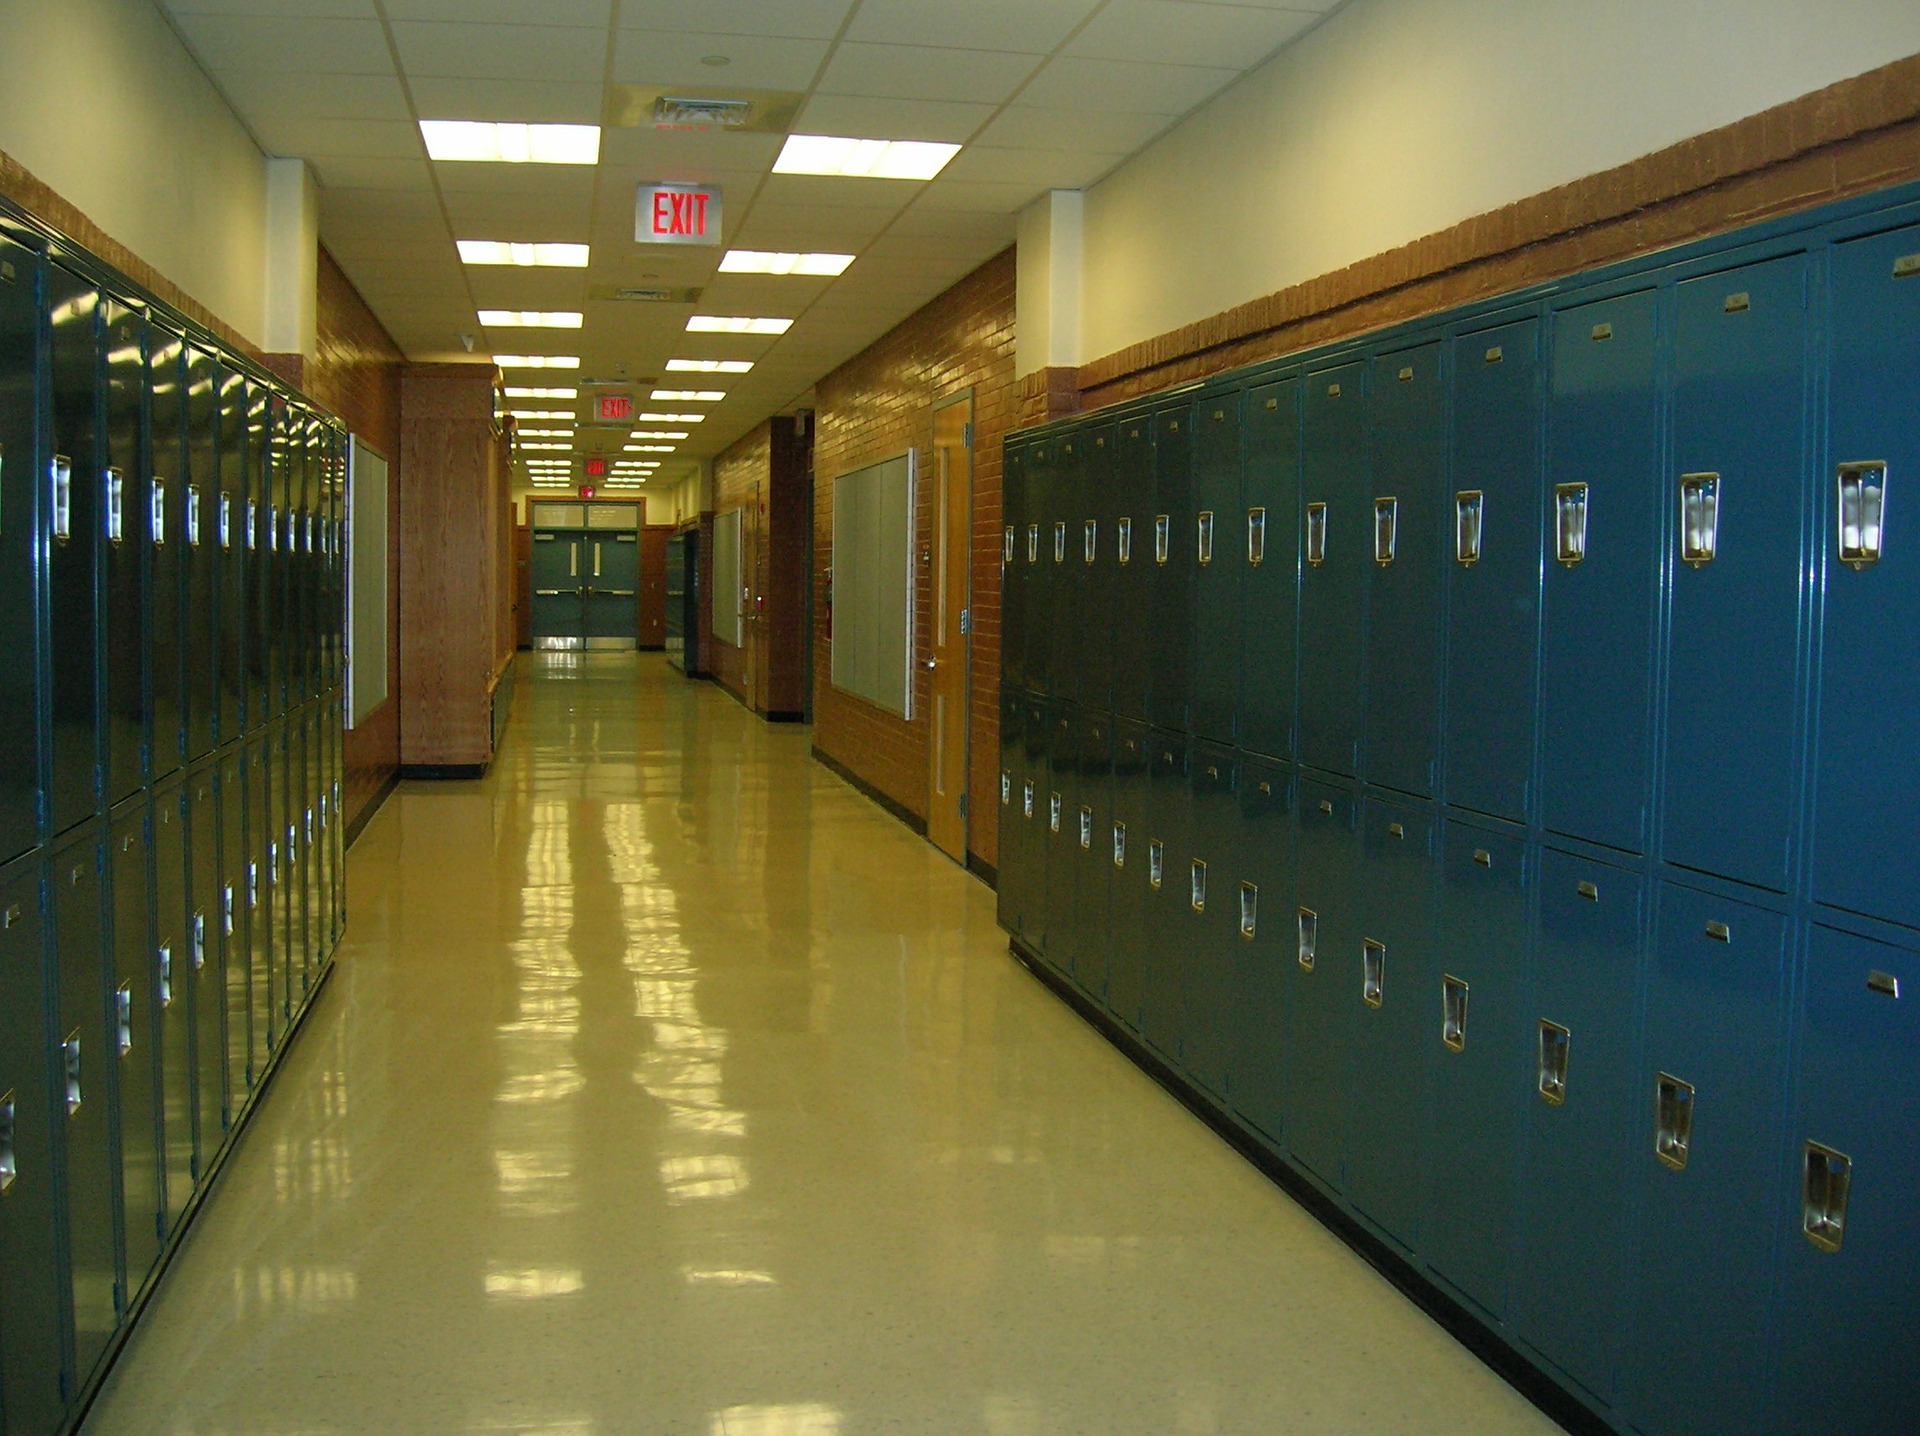 A highschool hallway lined with lockers.